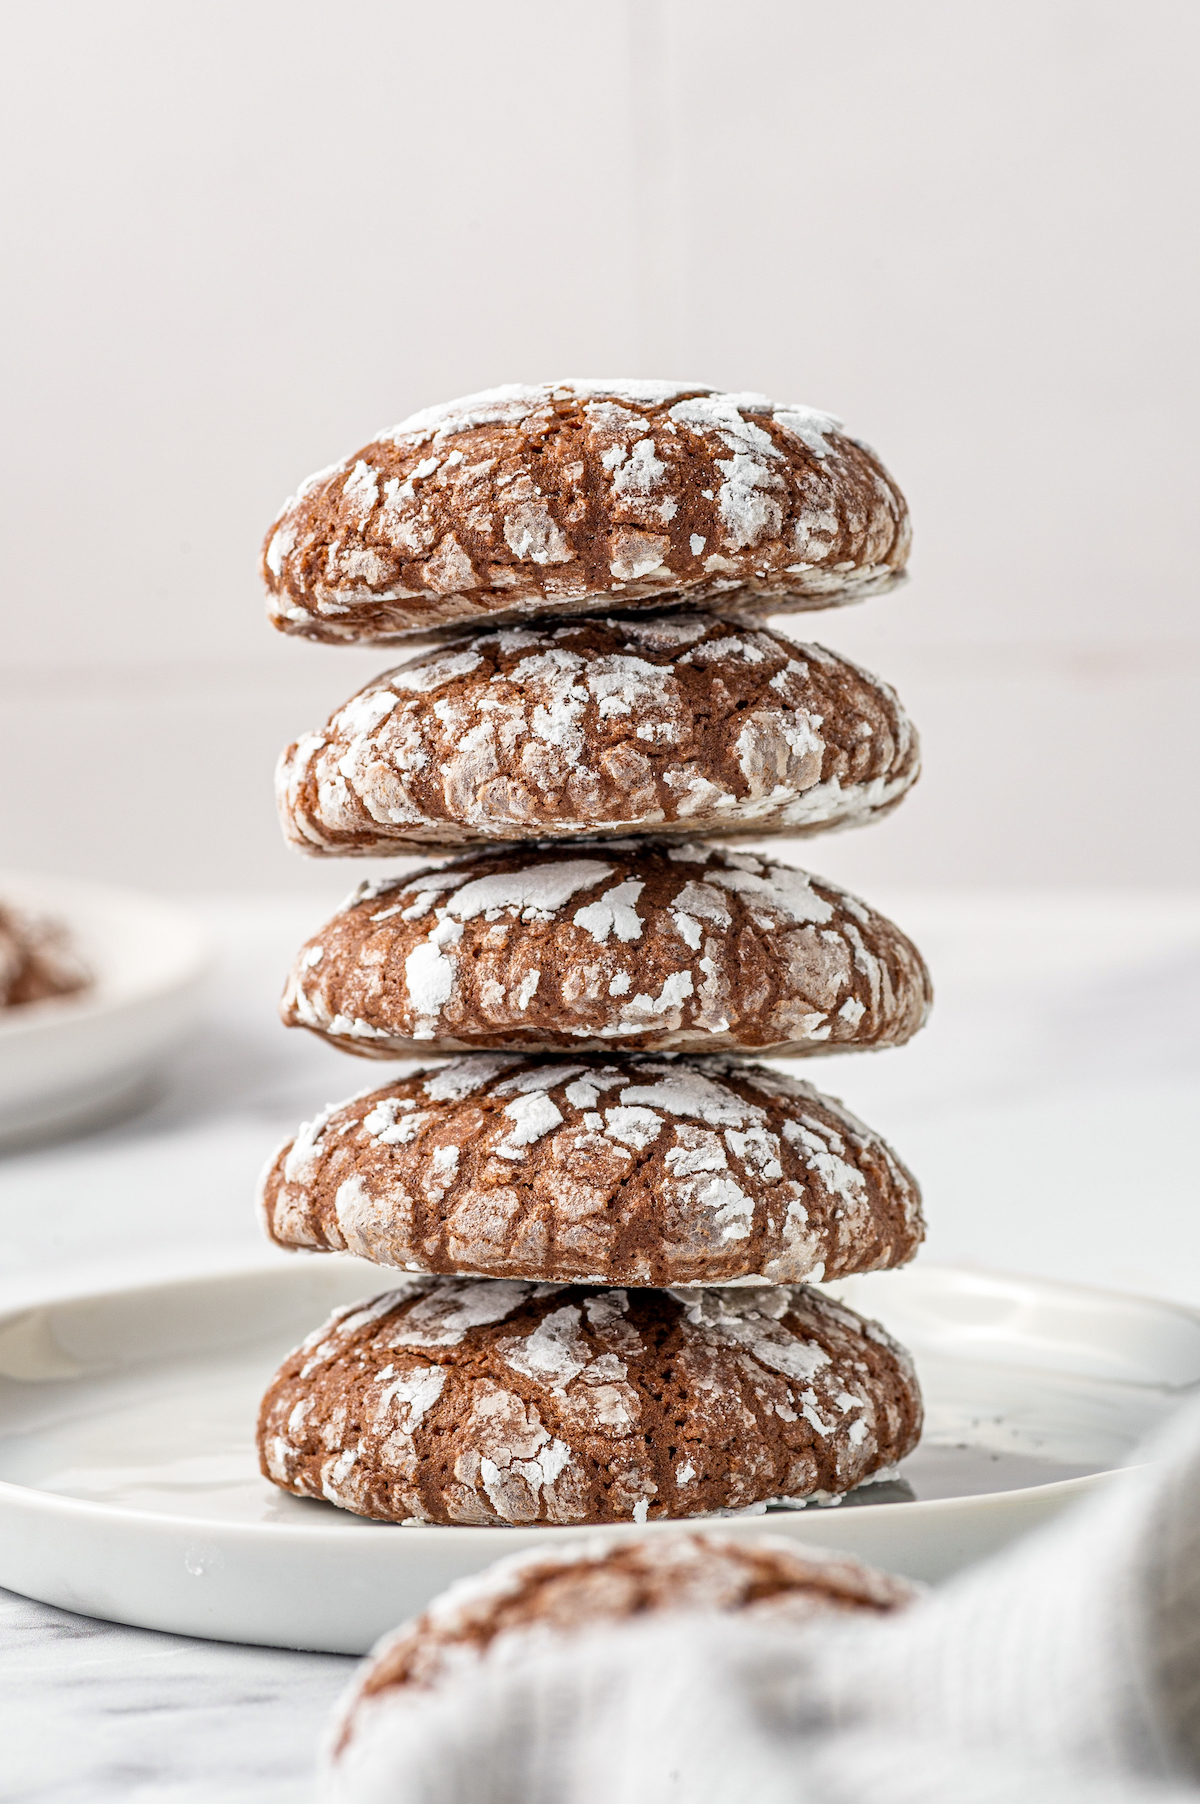 Five chocolate crinkle cookies stacked on top of each other on a plate.